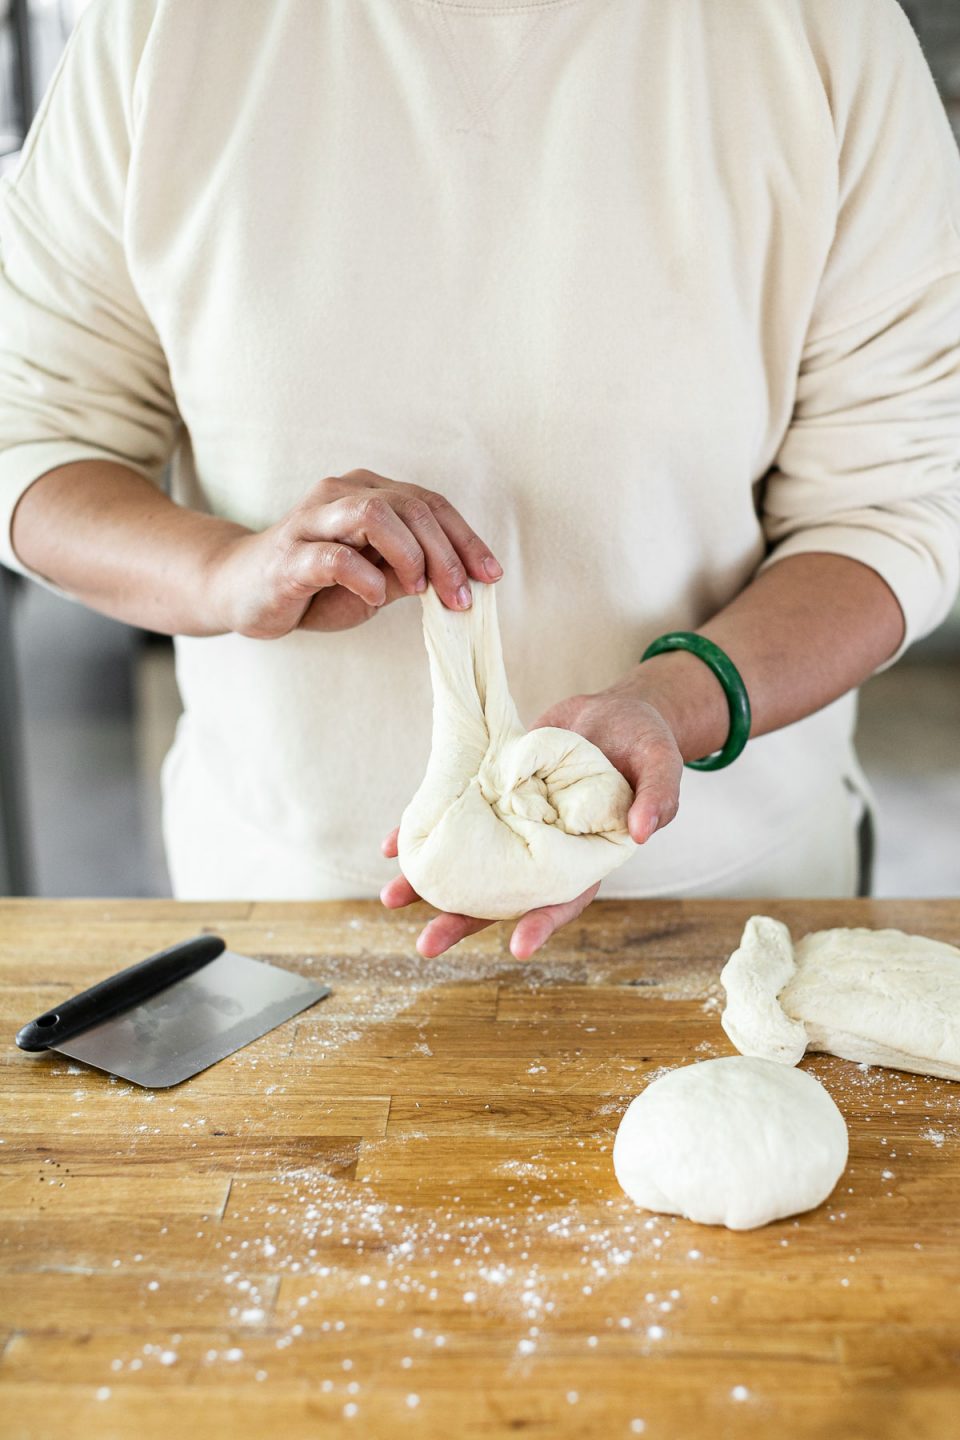 How to shape pizza dough balls: Jess, shown in a white sweatshirt, stands behind a butcher block counter dusted in flour. Jess is folding in edges of the pizza dough, forming a ball.